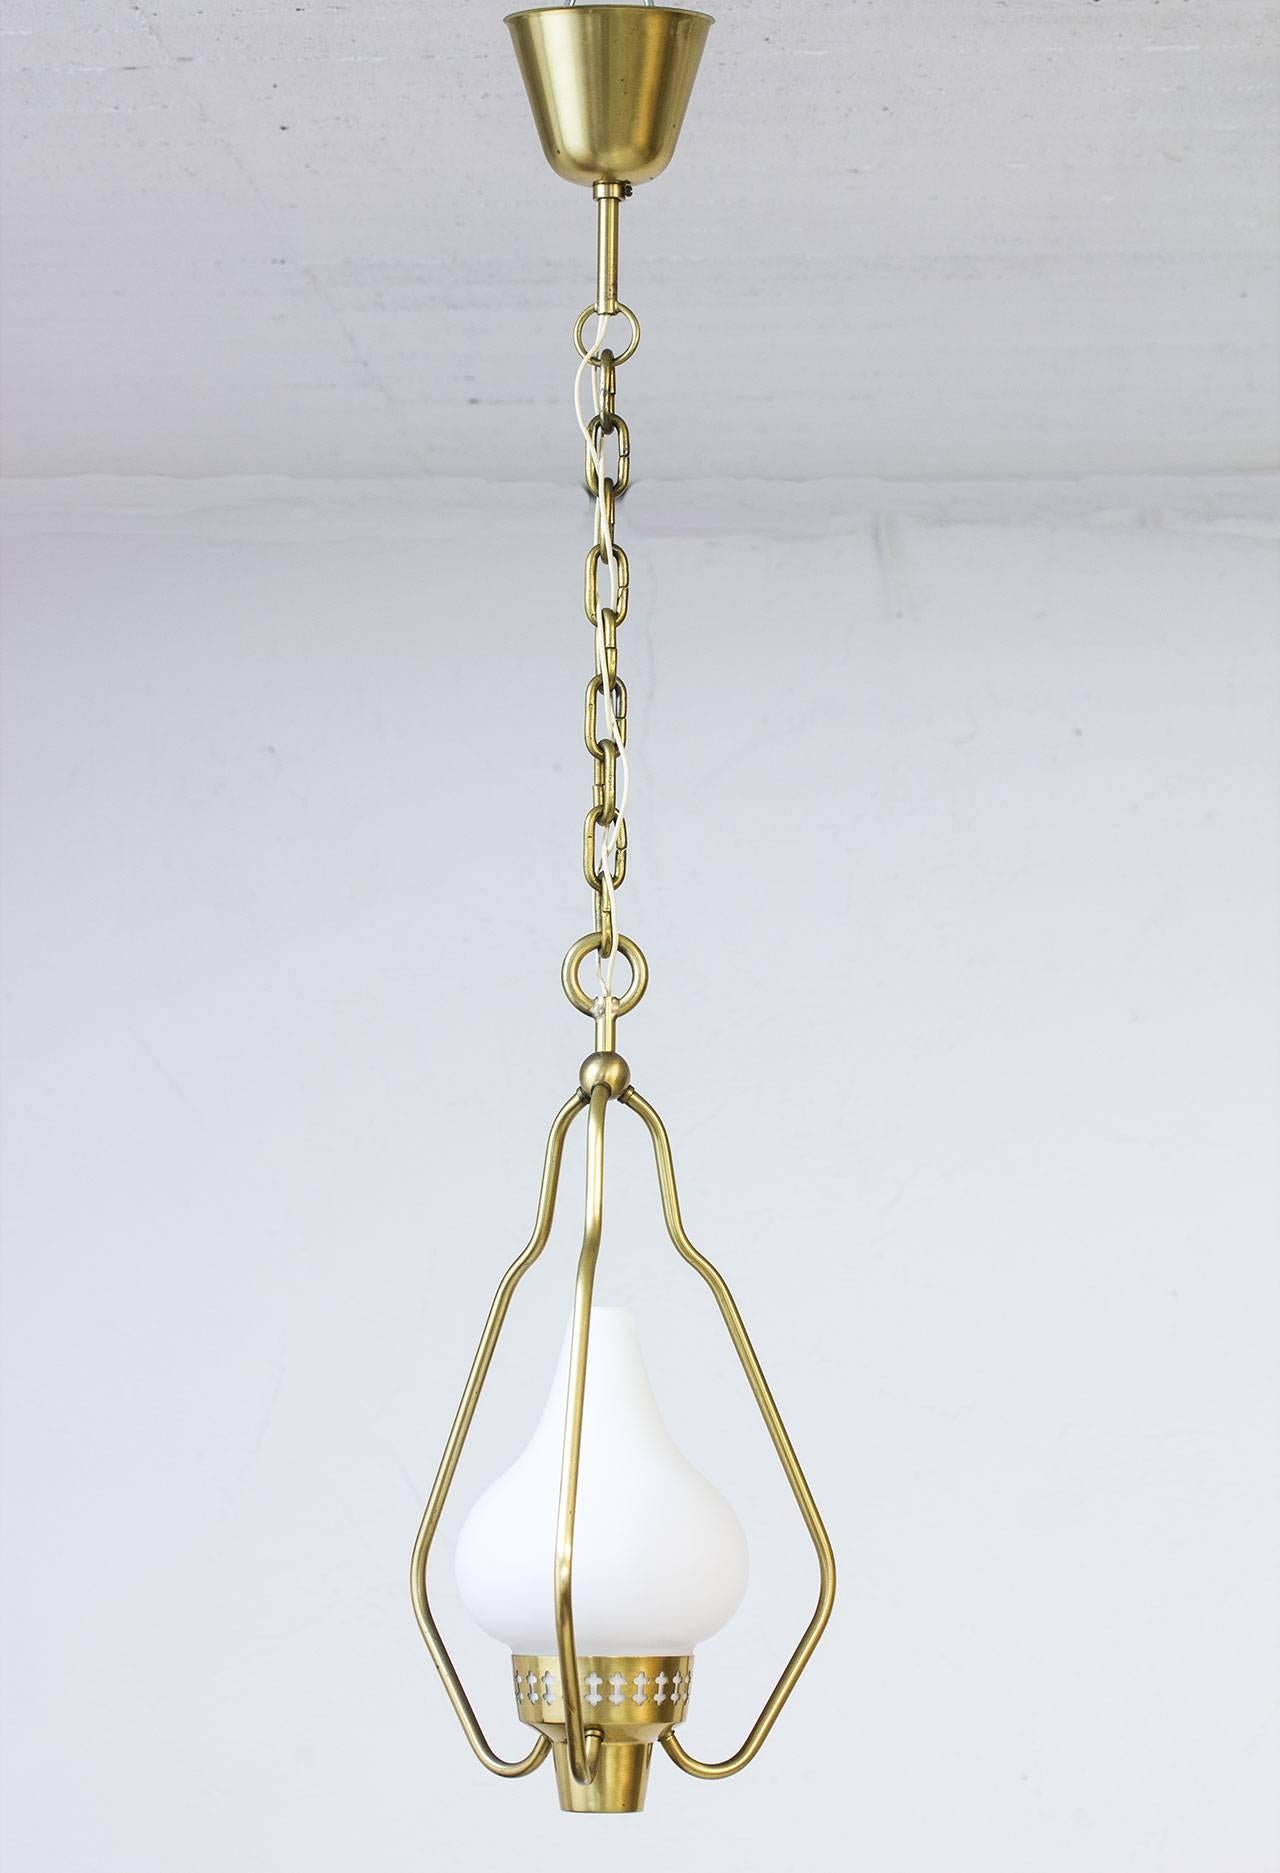 1950s pendant lamp designed by Hans Bergström, produced by ASEA in Sweden. Brass chain or frame and opaline glass shade.